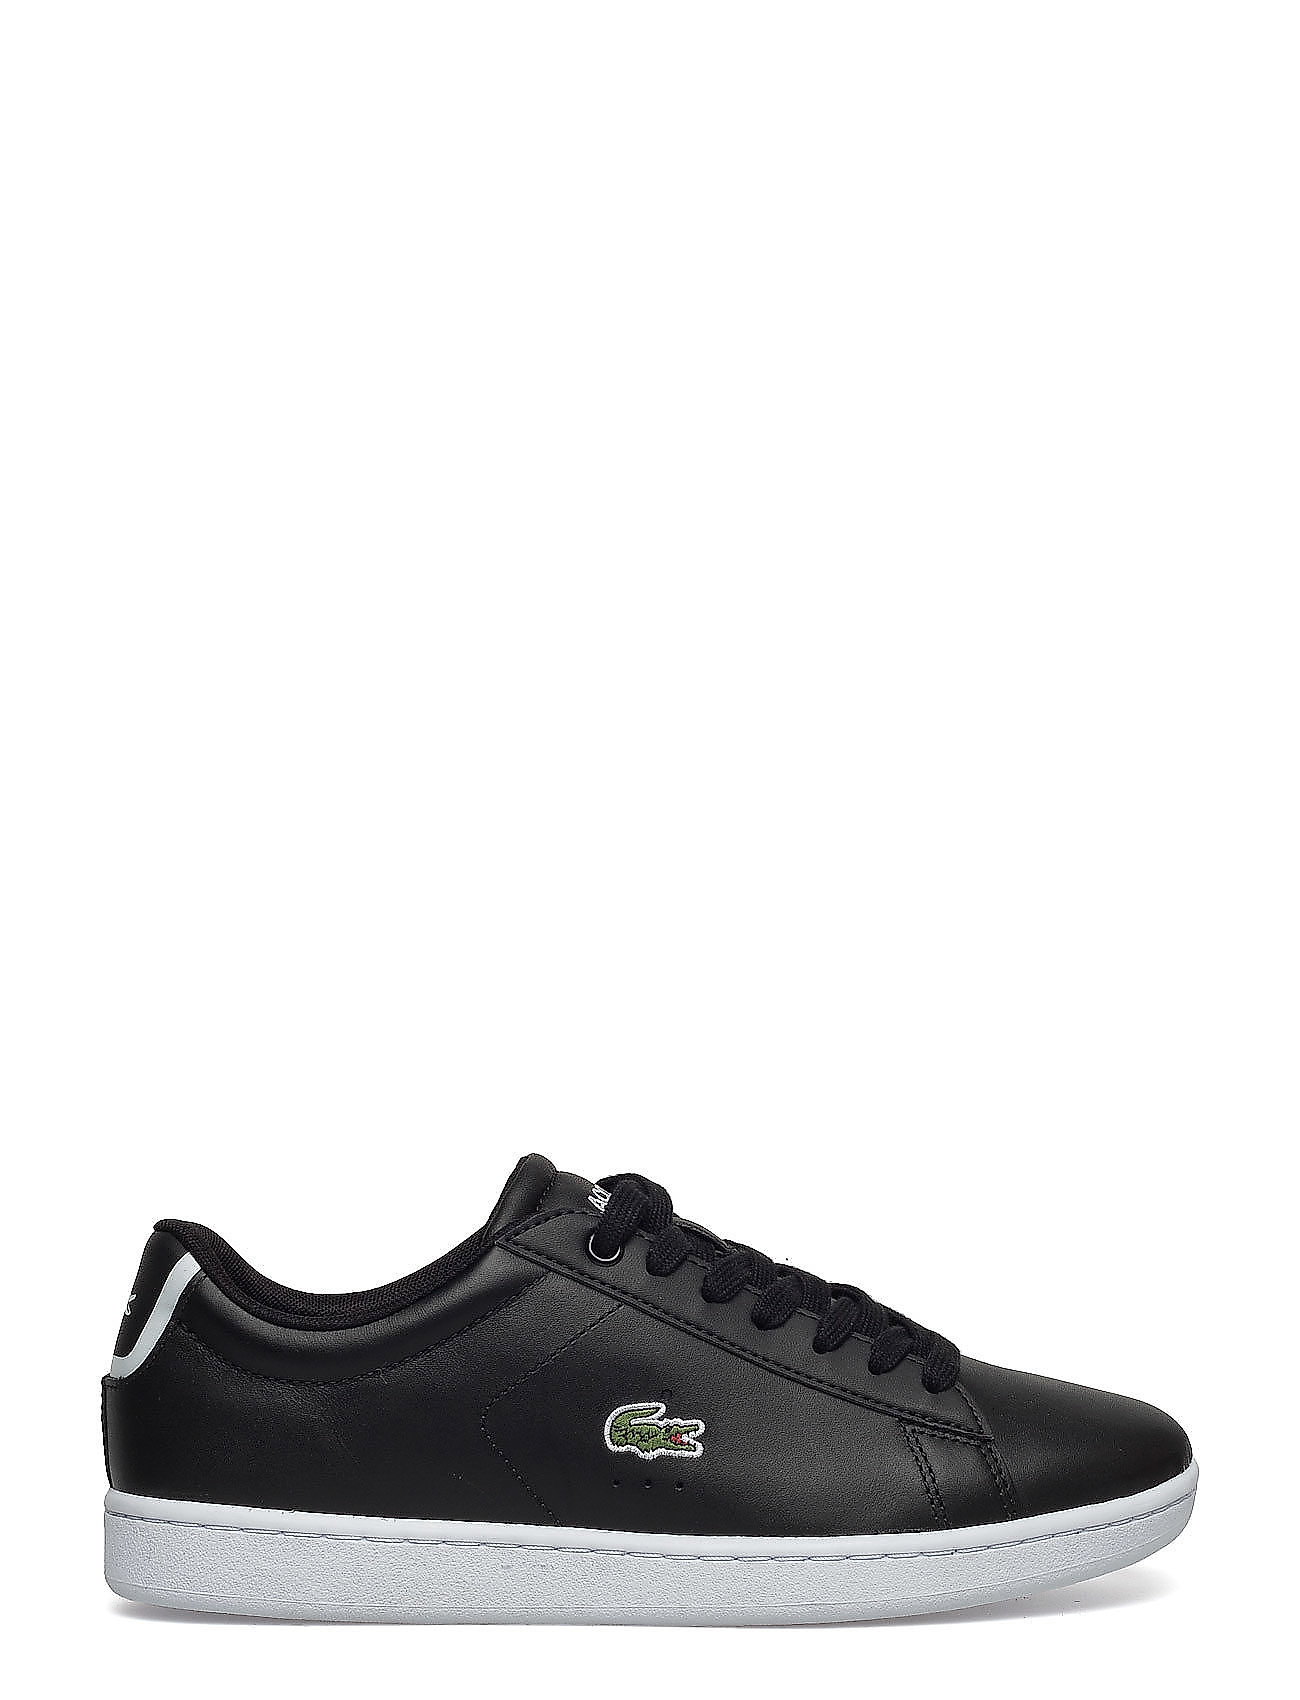 Lacoste sneakers – Carnaby Evo Bl 1 Low-top Sneakers Sort Shoes til dame i Sort